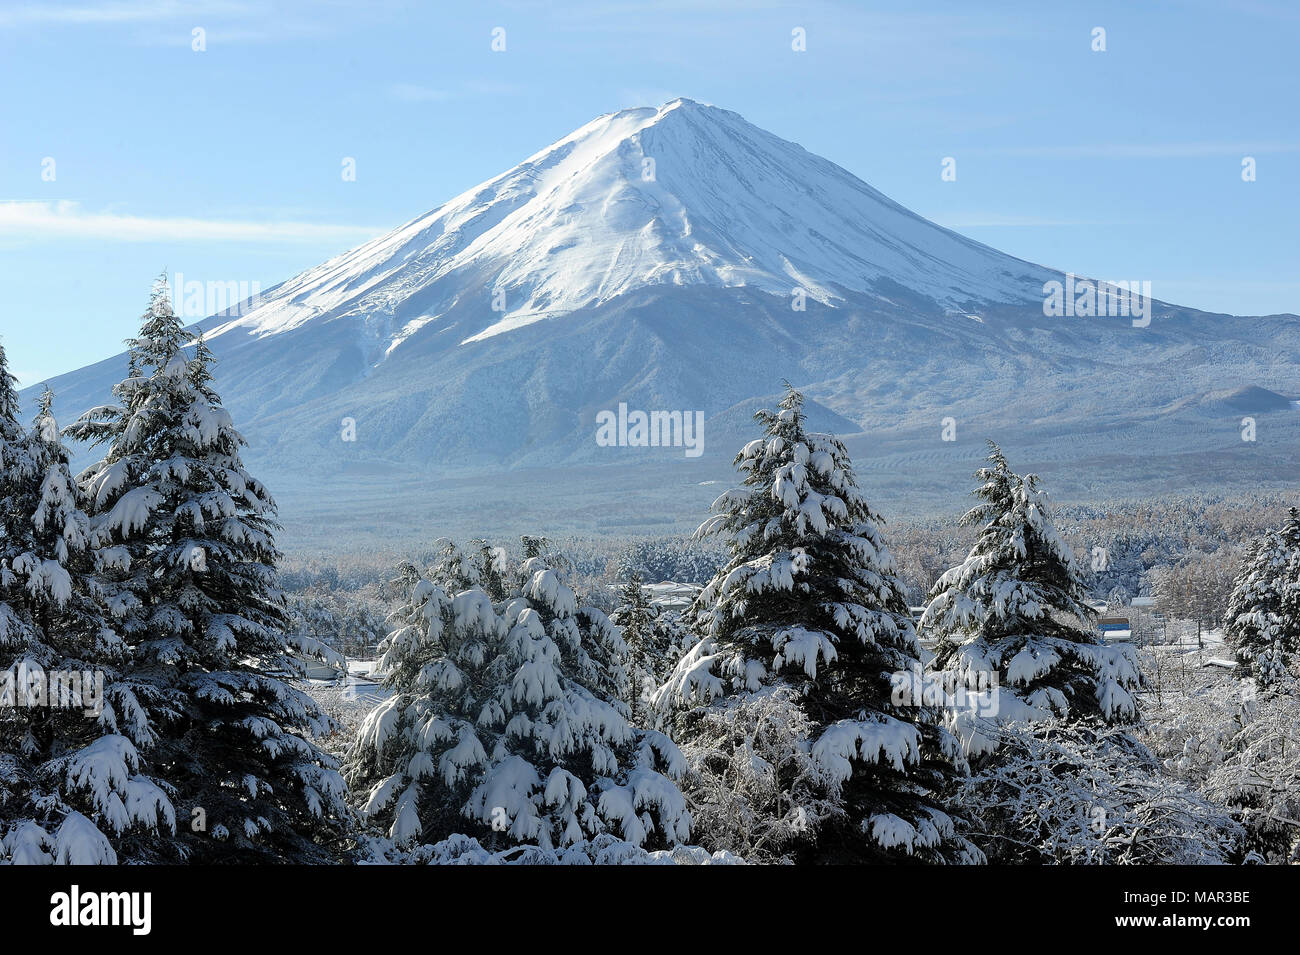 View of Mount Fuji, UNESCO World Heritage Site, in the early morning after a heavy fall of snow, Fujikawaguchiko, Japan, Asia Stock Photo